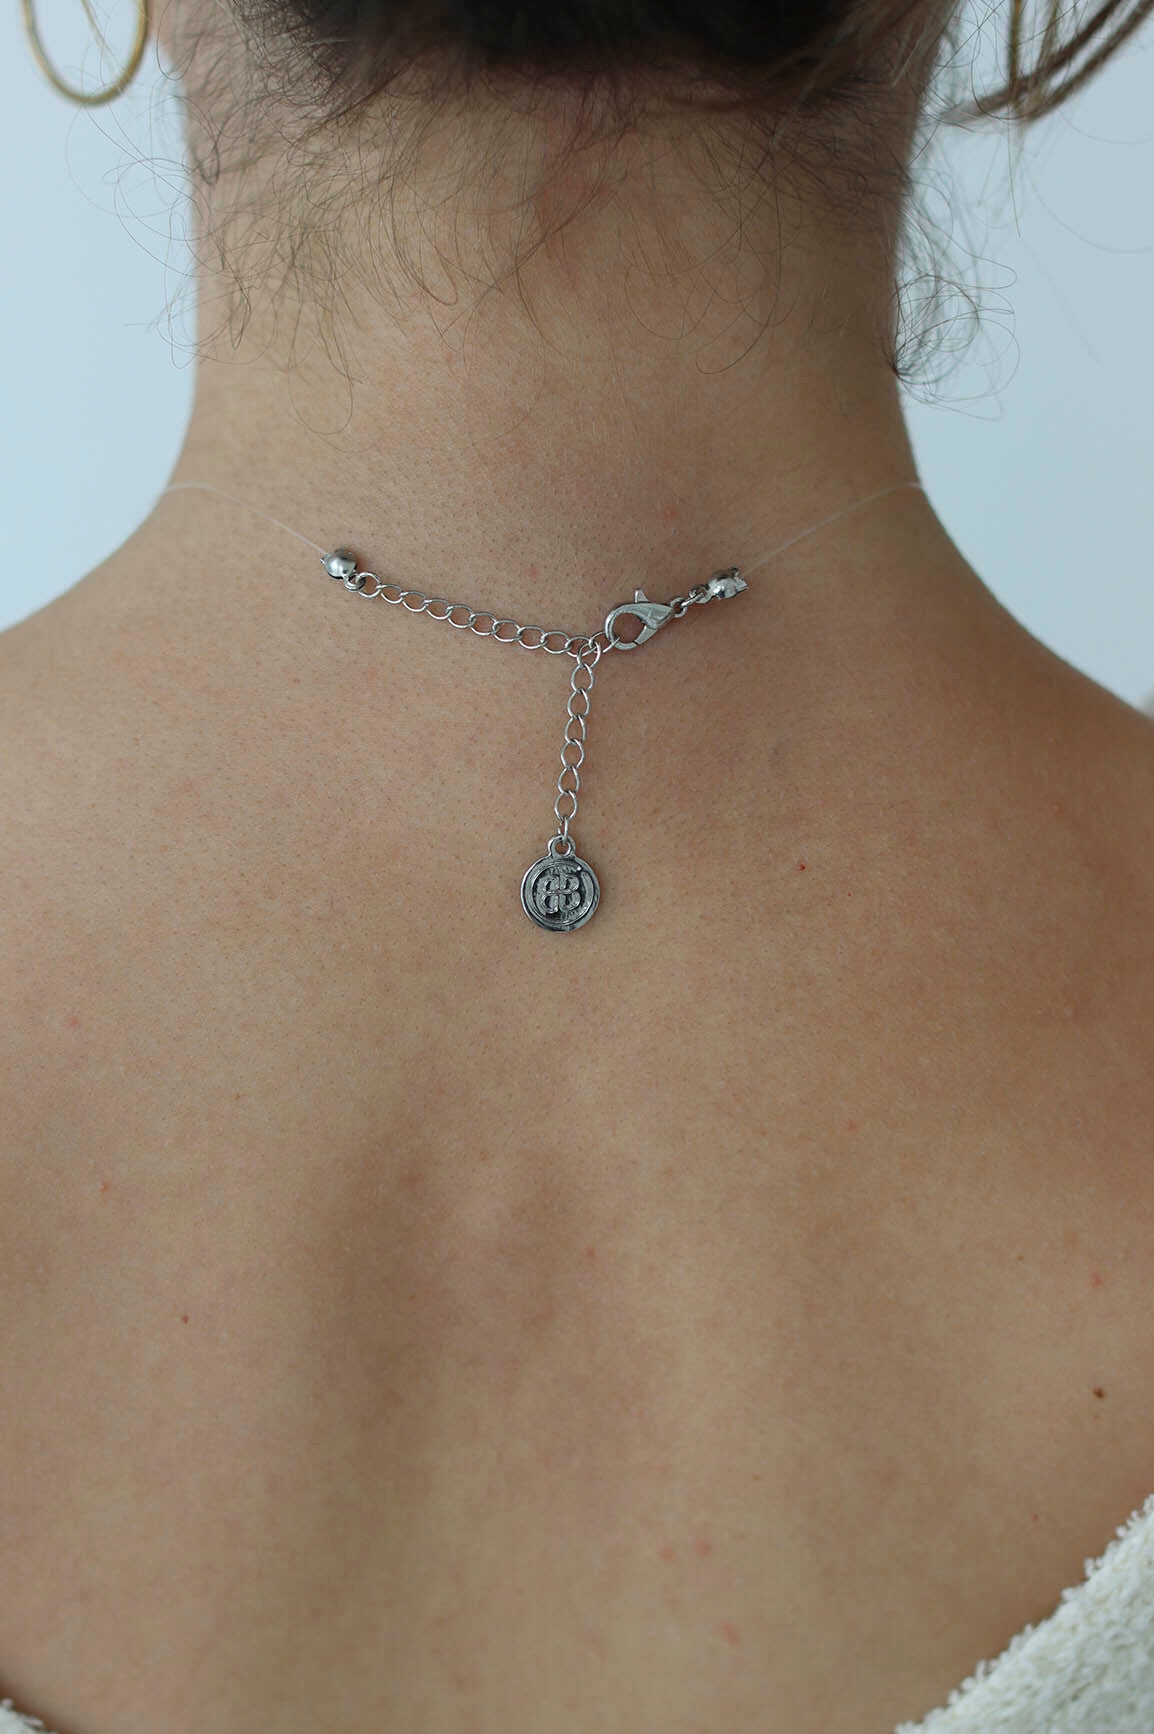 the back clasp of a choker